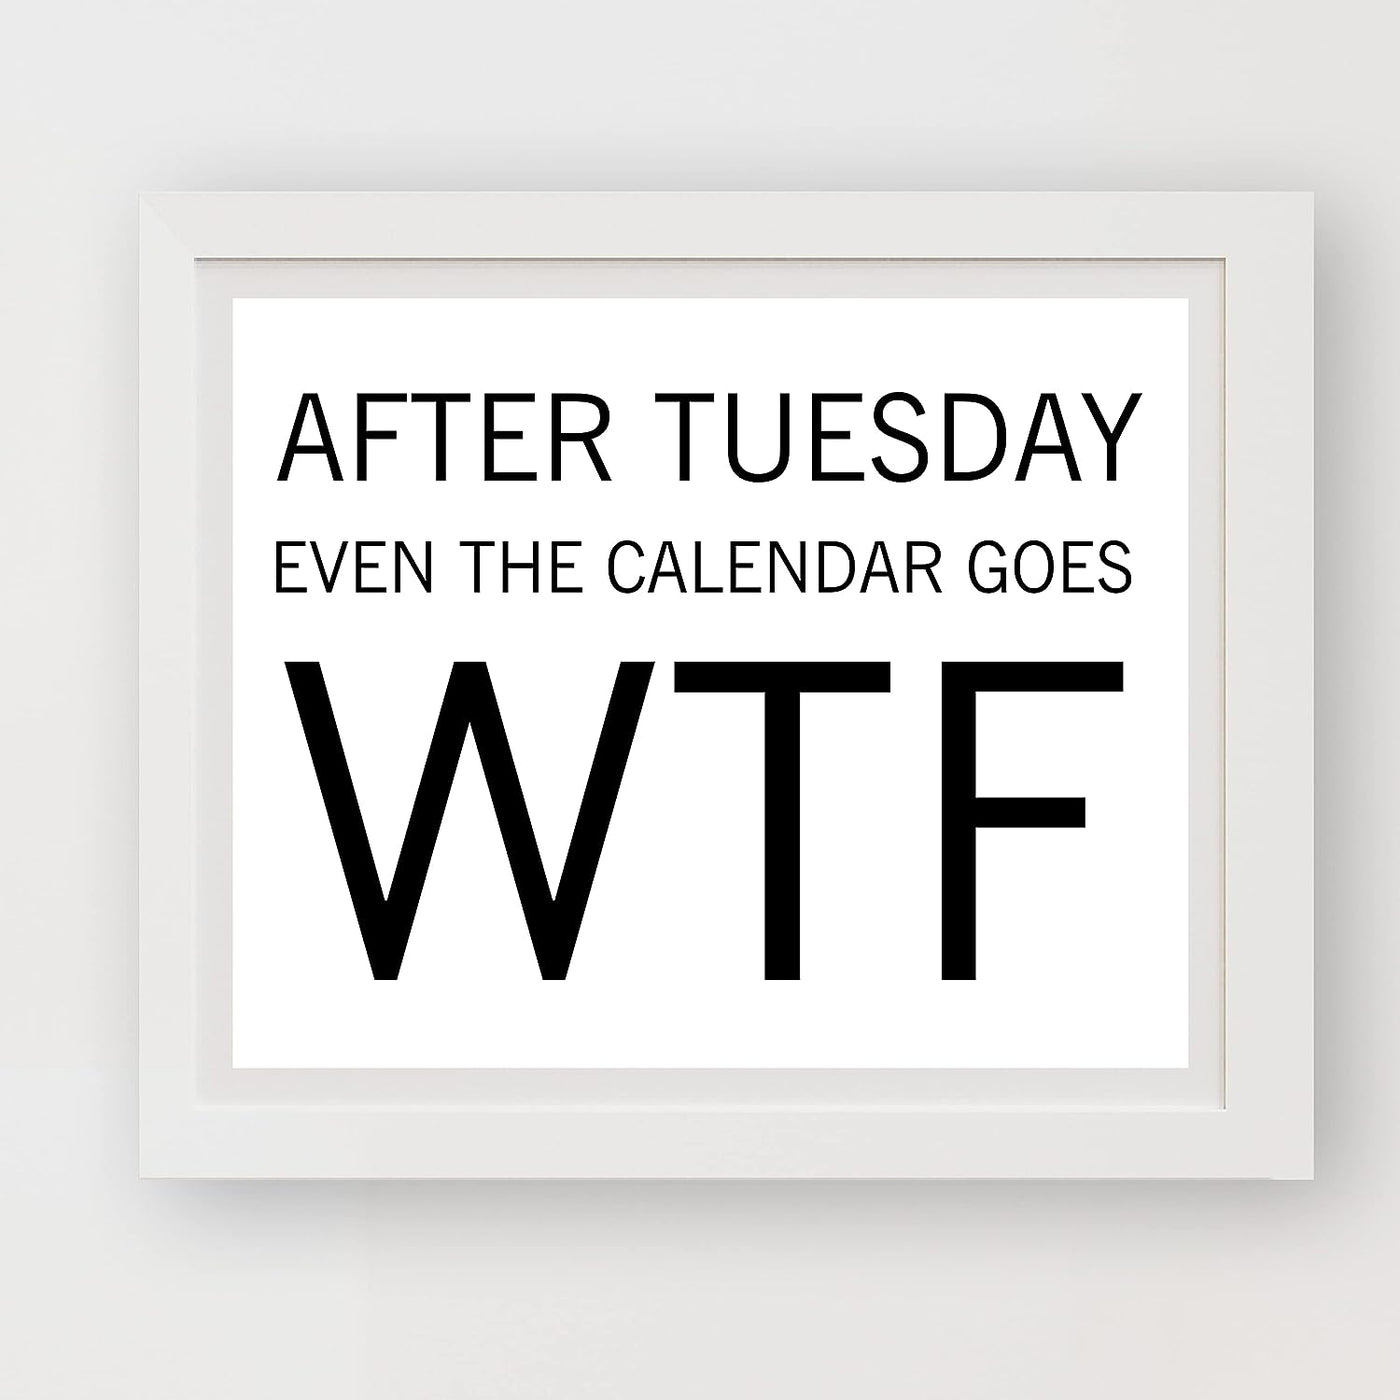 After Tuesday, Even the Calendar Goes WTF Funny Wall Sign -10 x 8" Sarcastic Art Print -Ready to Frame. Humorous Decor for Home-Office-Bar-Shop-Man Cave. Great Desk-Cubicle Sign. Fun Novelty Gift!